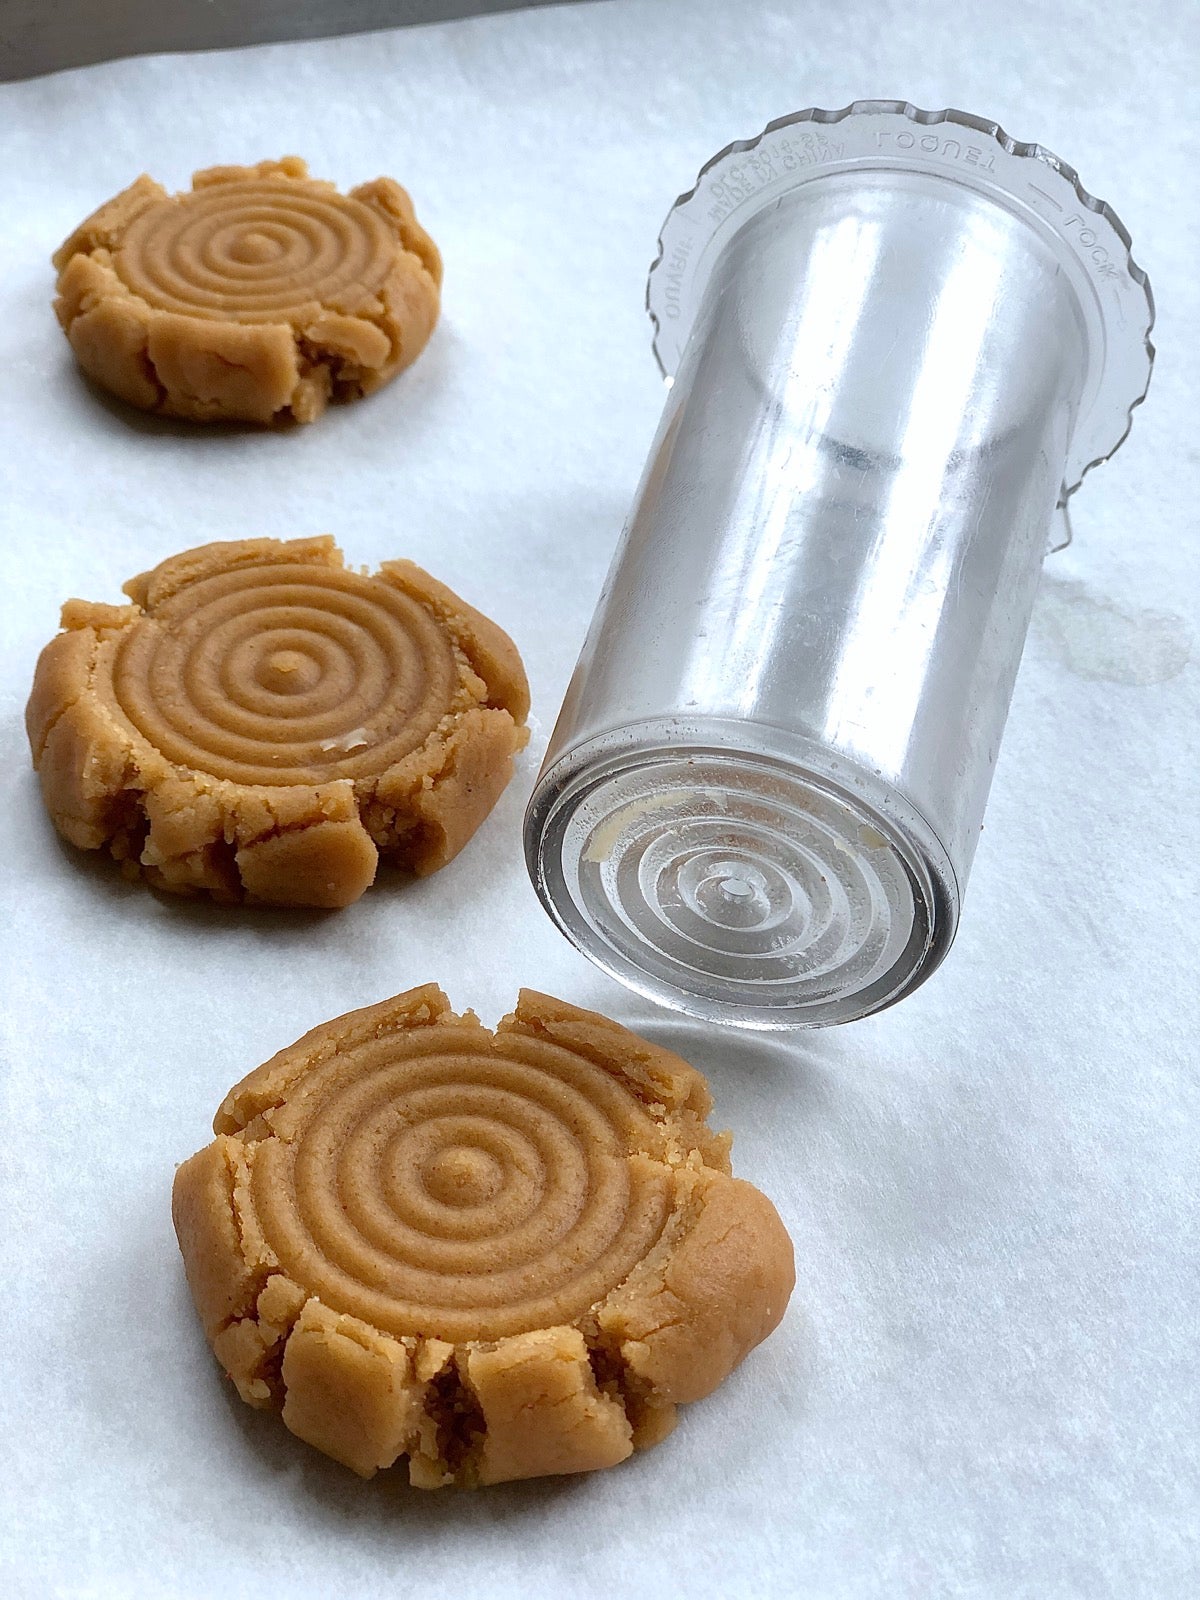 Puher from a food processor being used to imprint a design on the top of balls of shortbread dough.